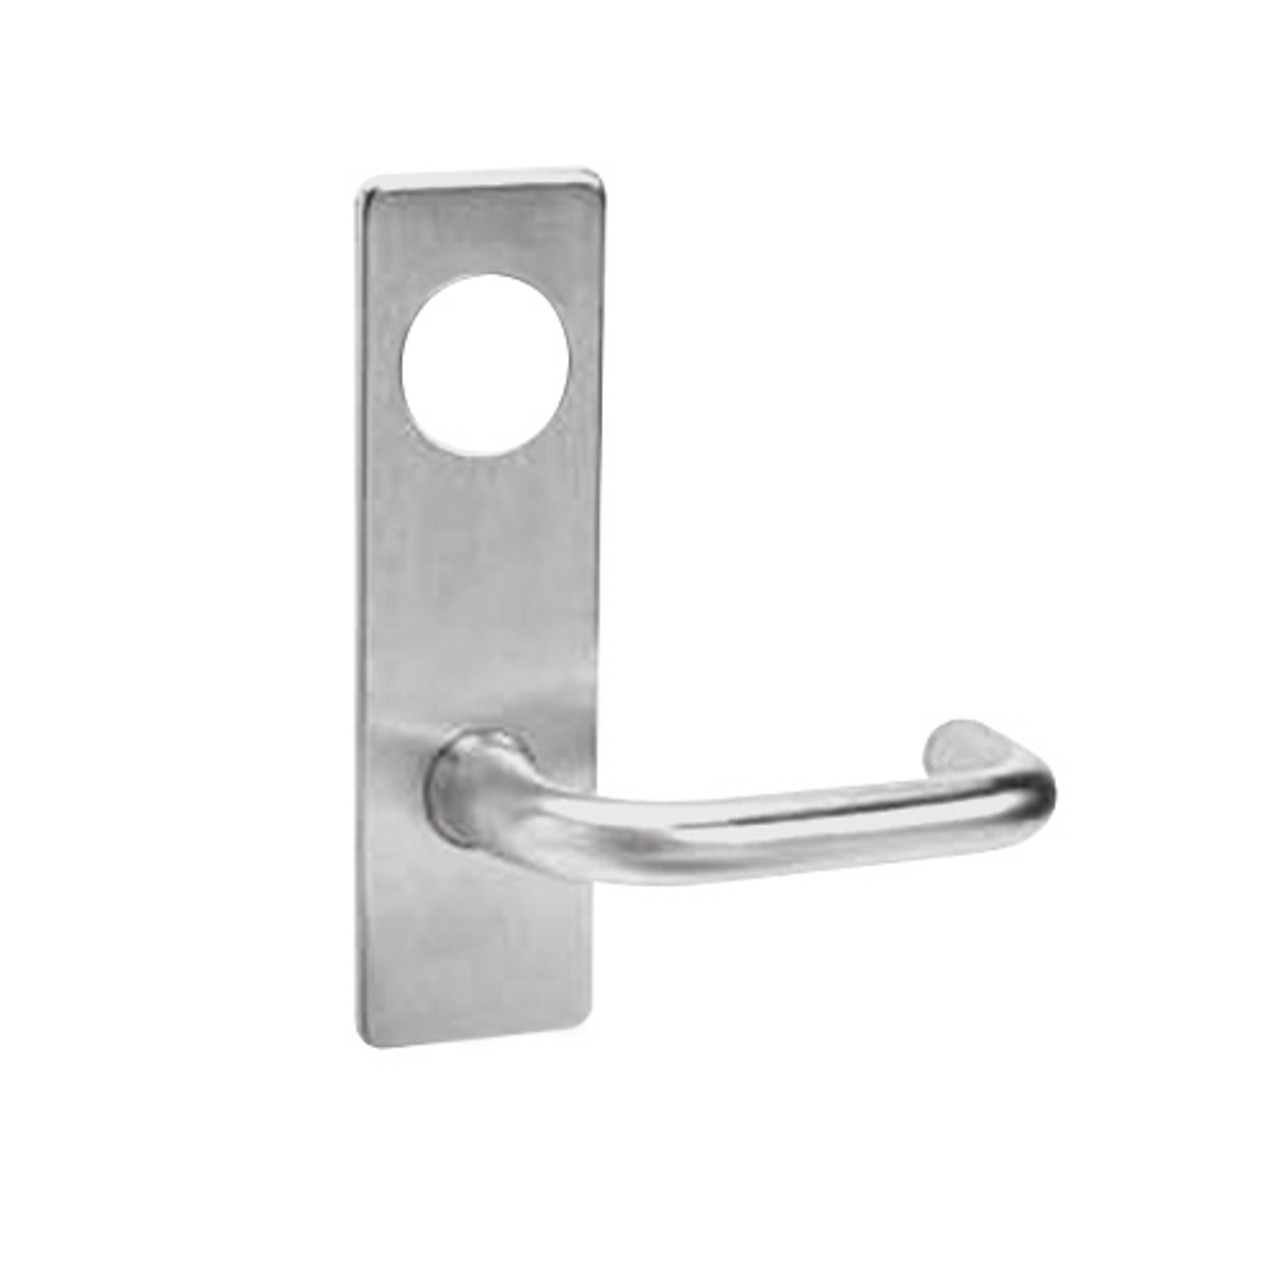 ML2048-LWN-630-M31 Corbin Russwin ML2000 Series Mortise Entrance Trim Pack with Lustra Lever in Satin Stainless